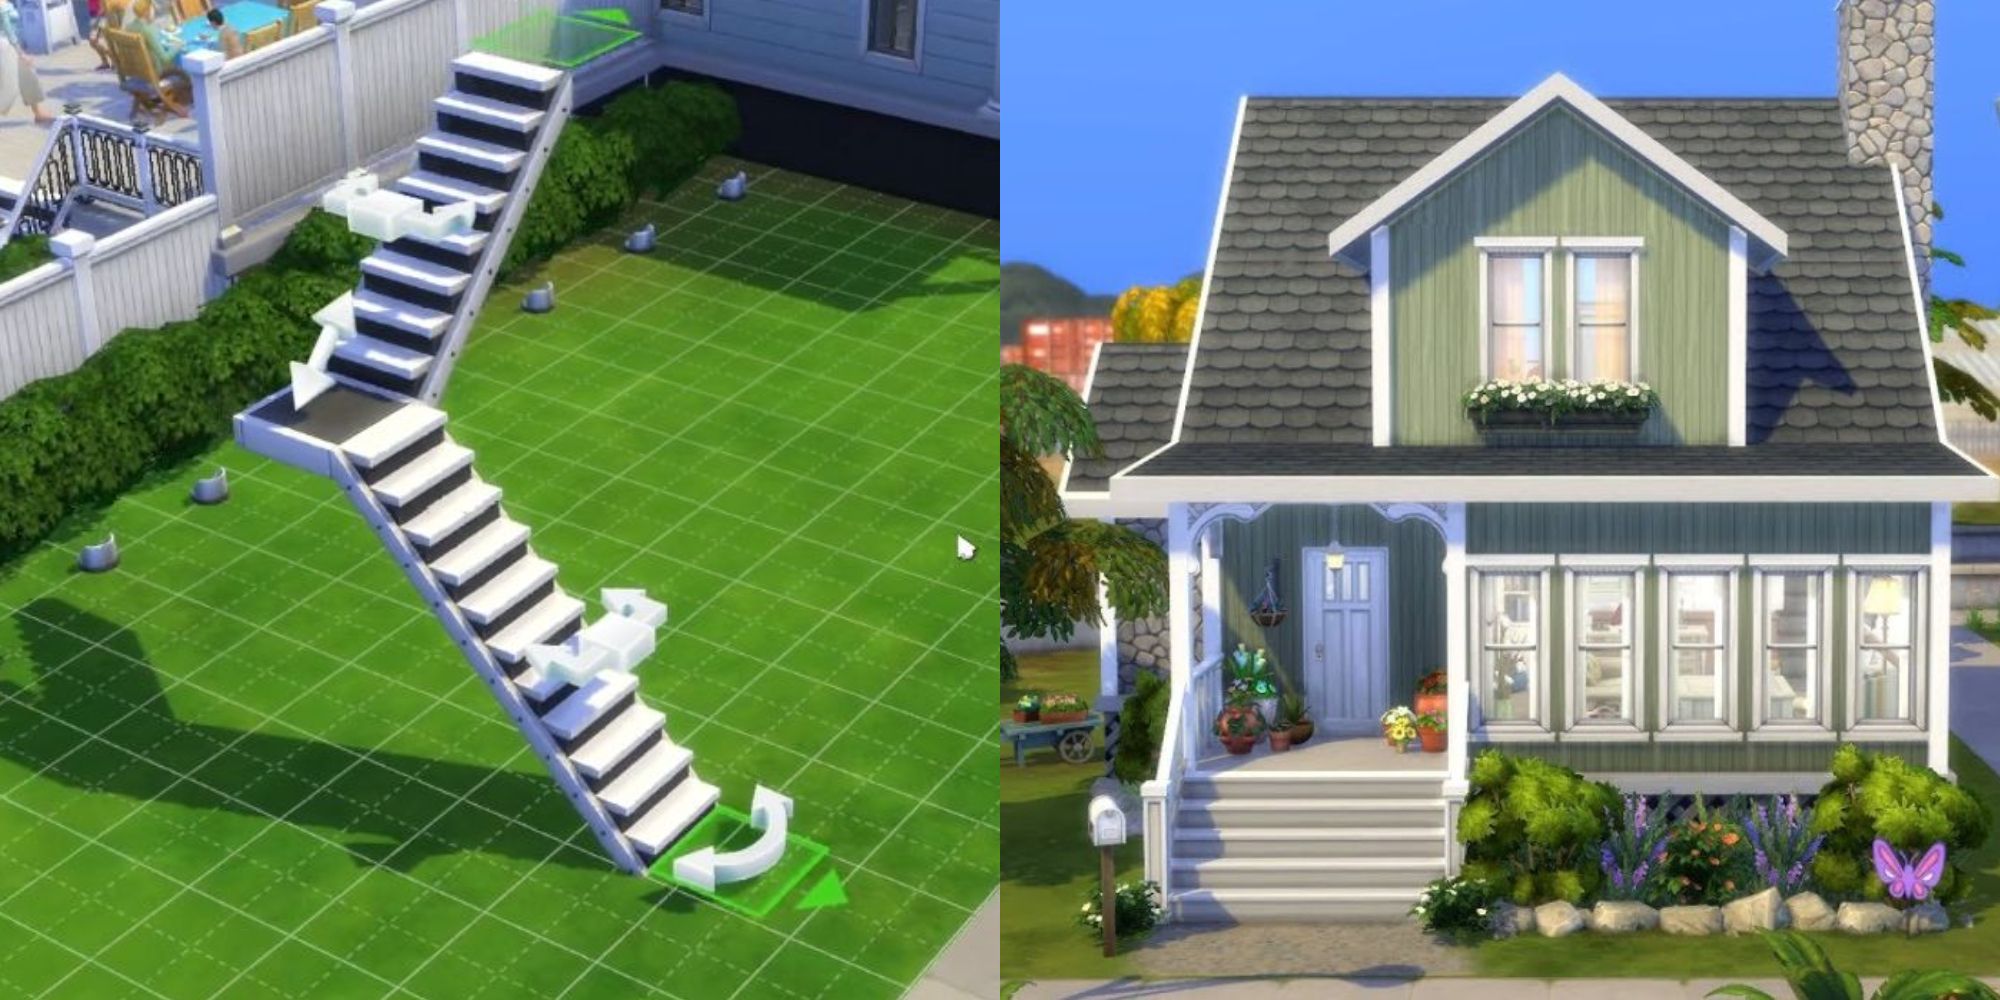 The Sims 4 - PC tips and tricks to improve your builds without mods